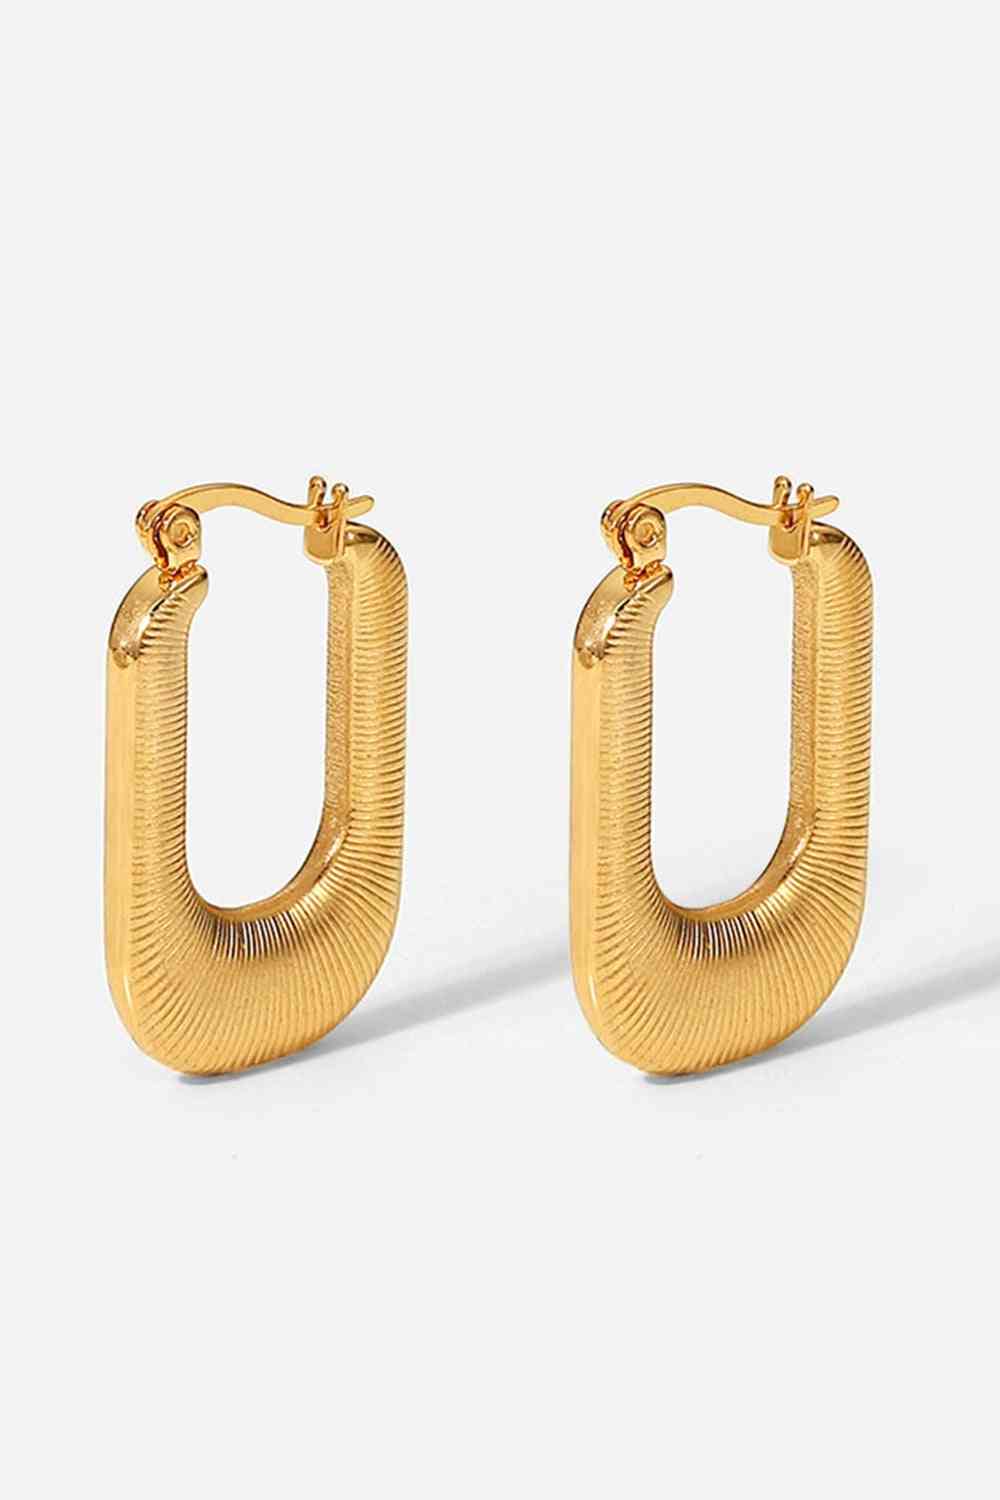 Explore More Collection - Good Luck Charm Screw-Thread U-Shaped Earrings